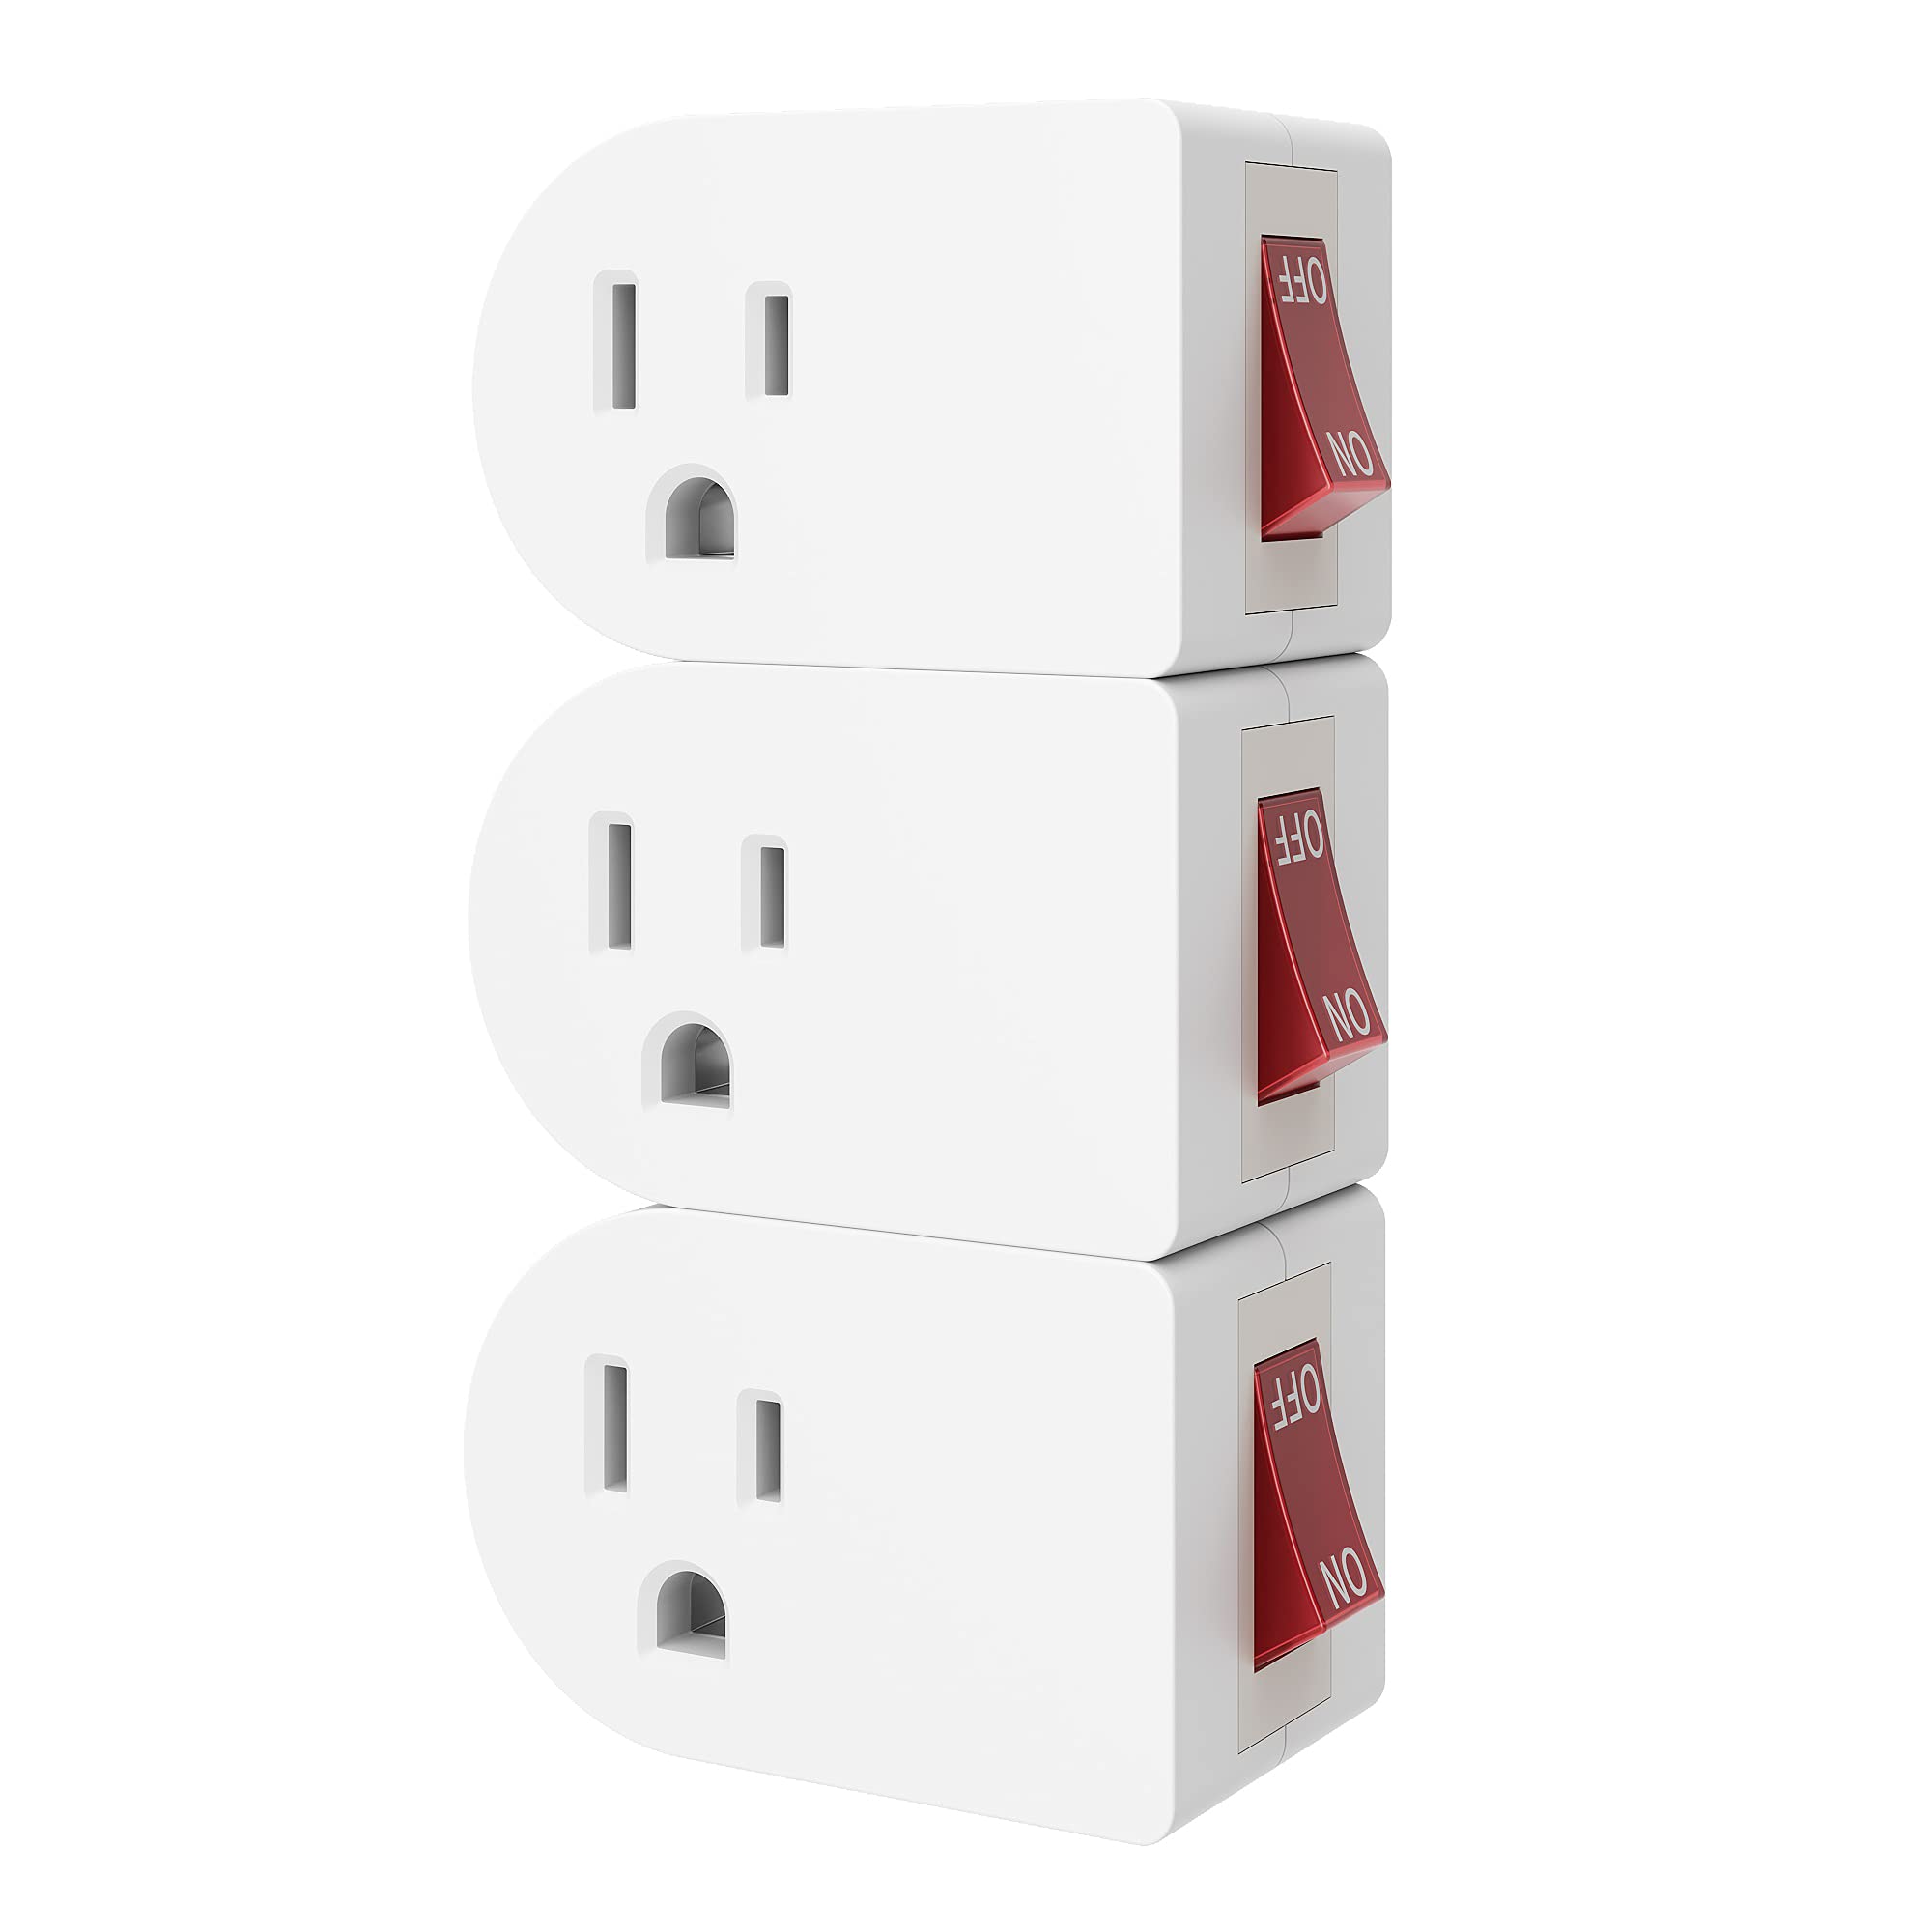 Power switch or electrical outlet with a plug